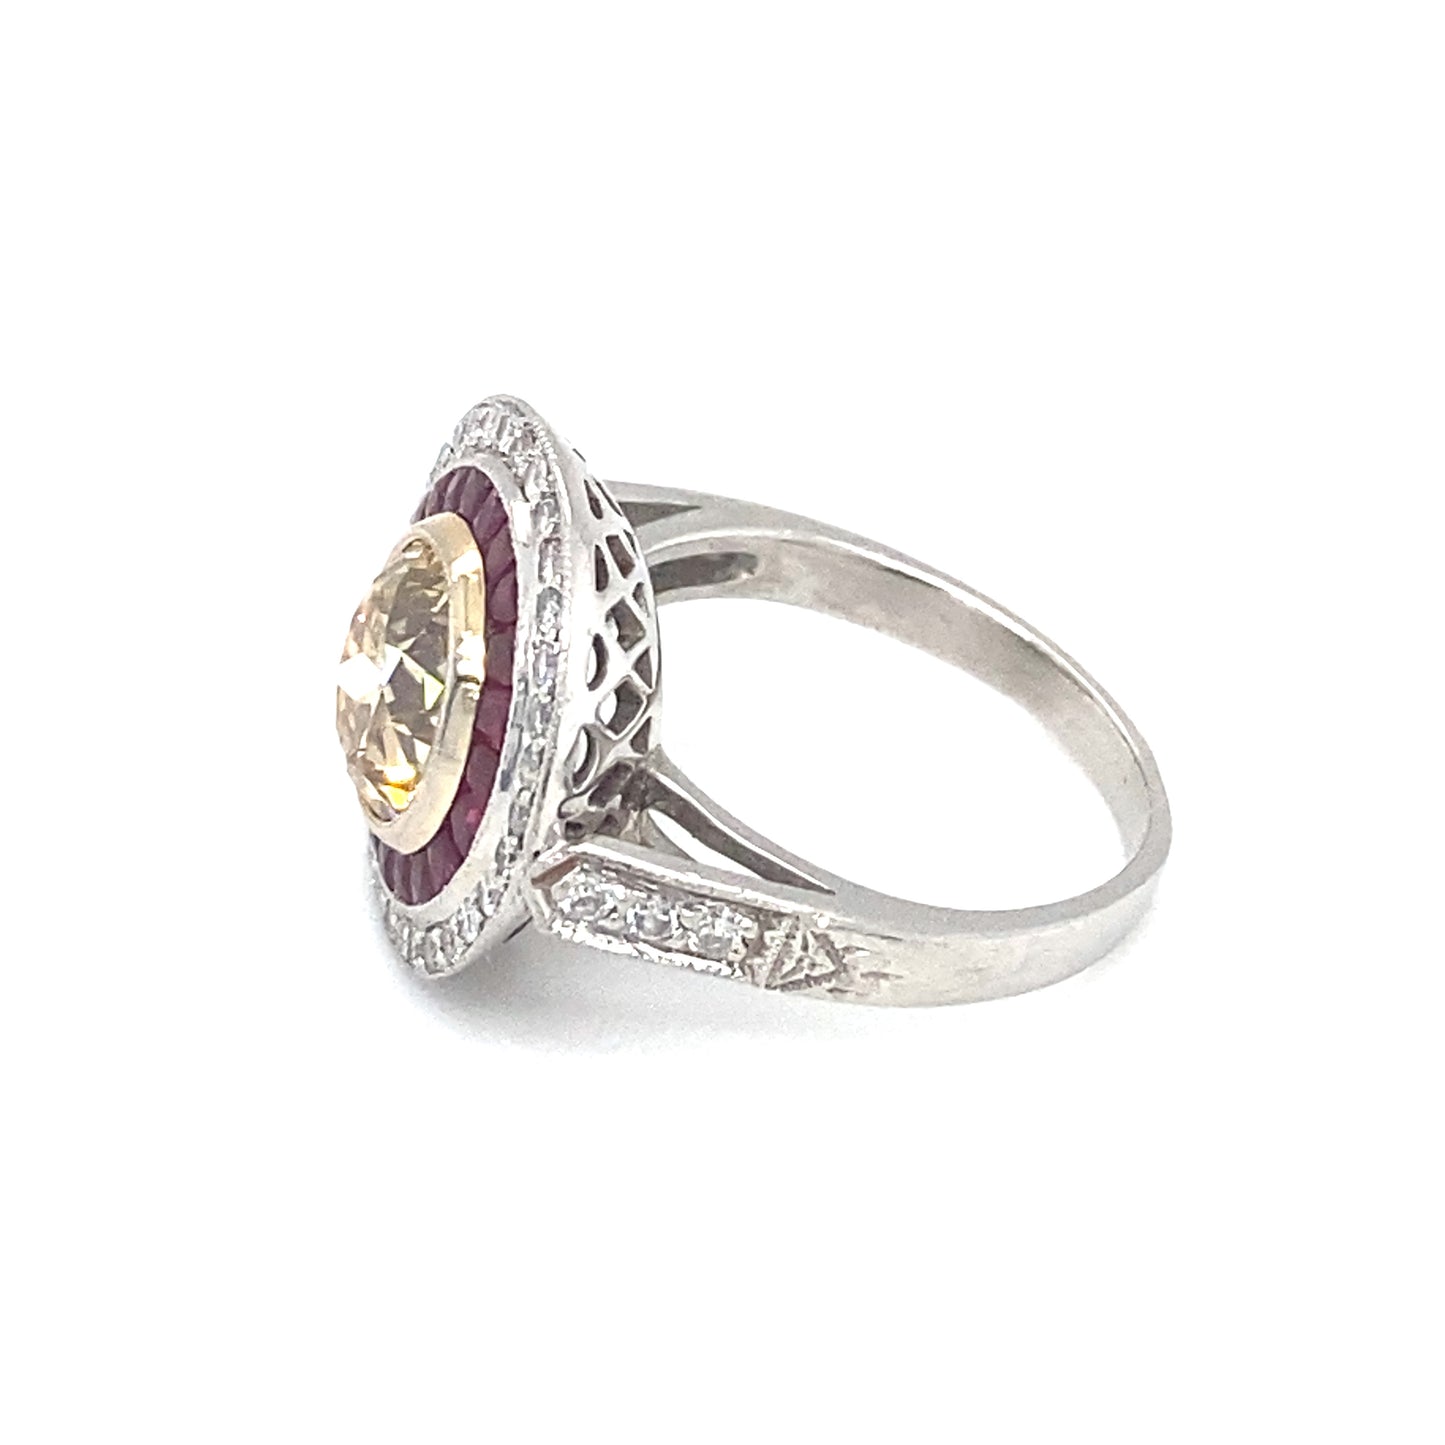 Art Deco Style GIA 2.18ct Brown Diamond and Ruby Engagement Ring in Platinum